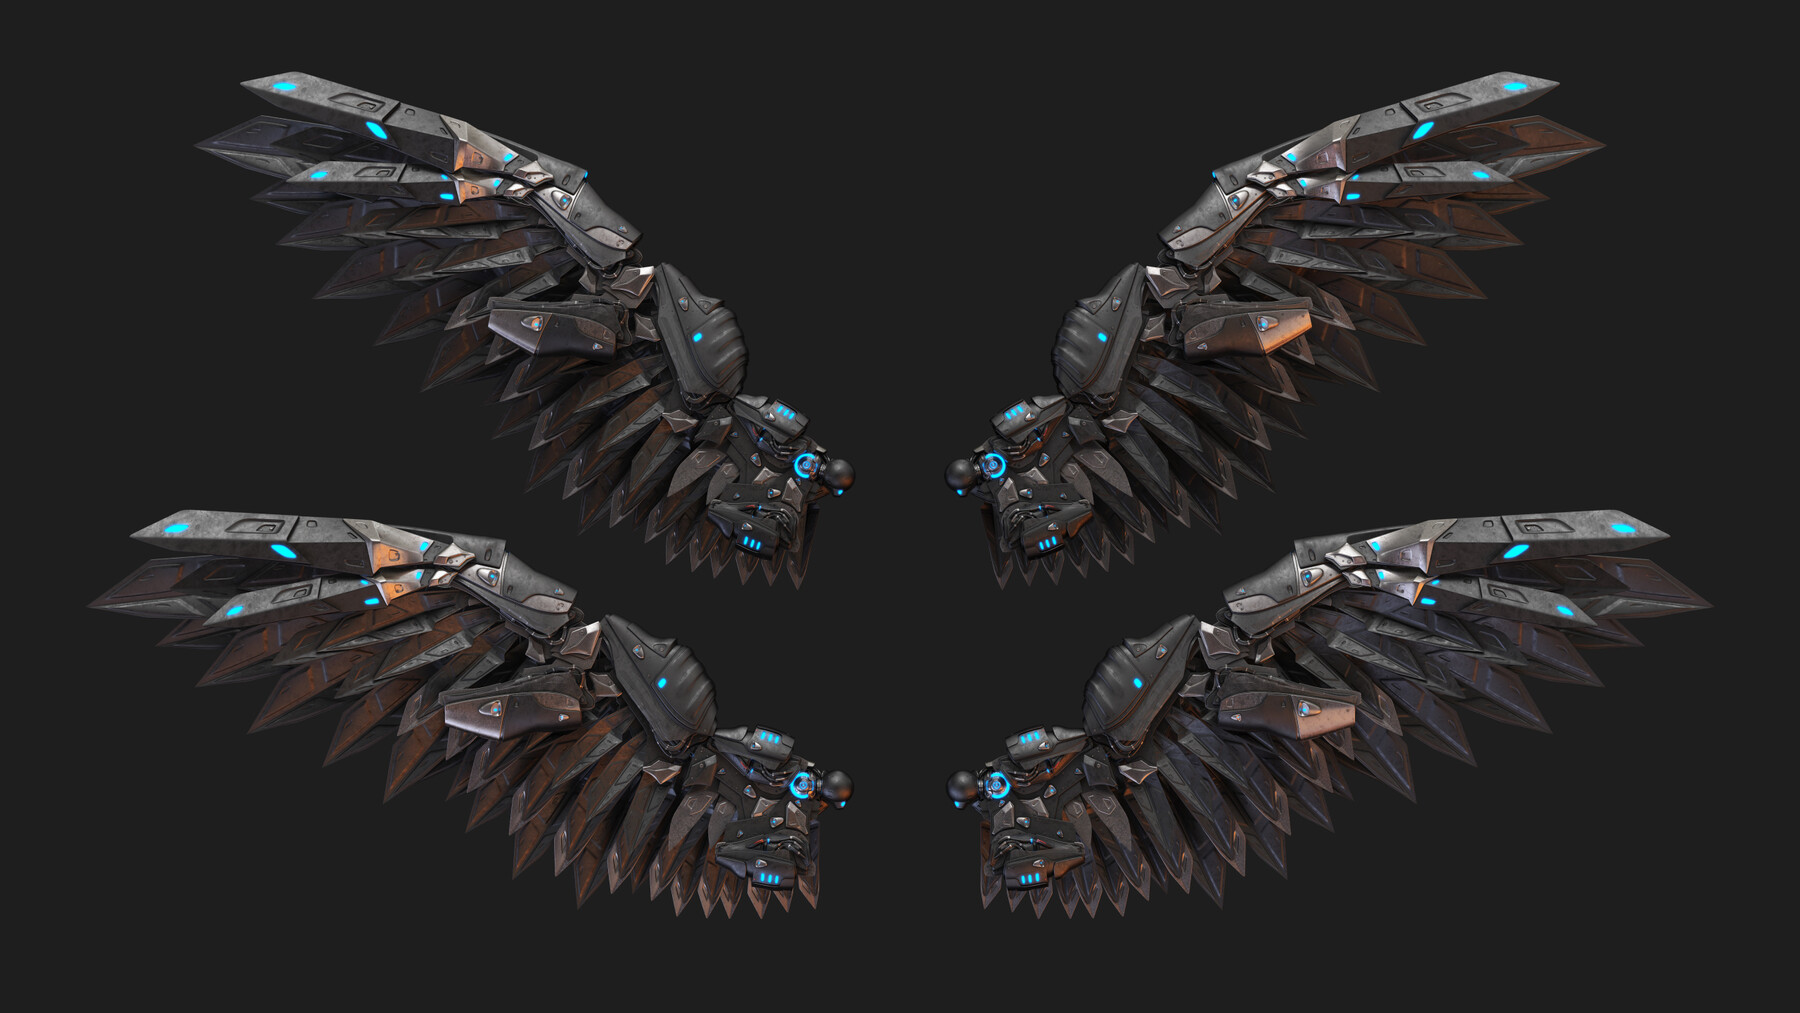 ArtStation - Sci-fi mecha wings and claws images set vol. III | Resources